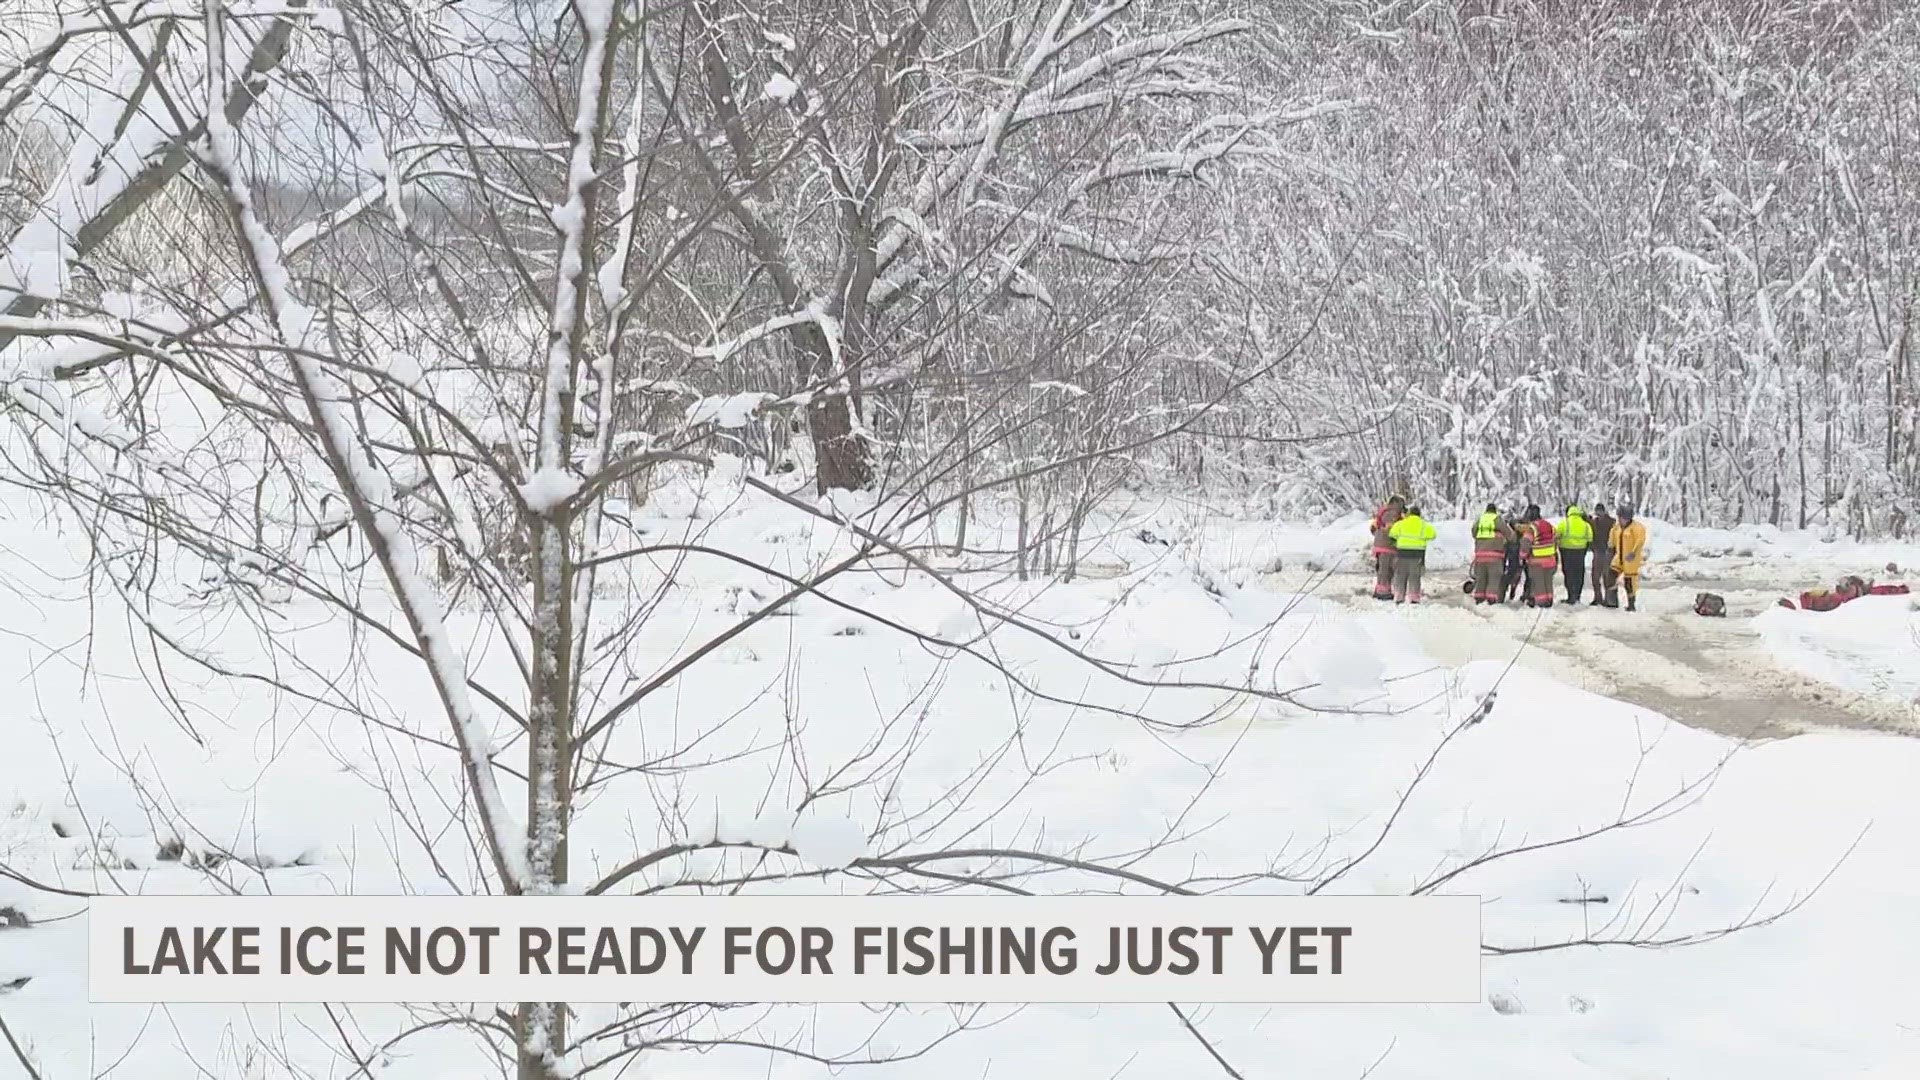 While it might be tempting to get on the ice and start fishing, it's not ready just yet.